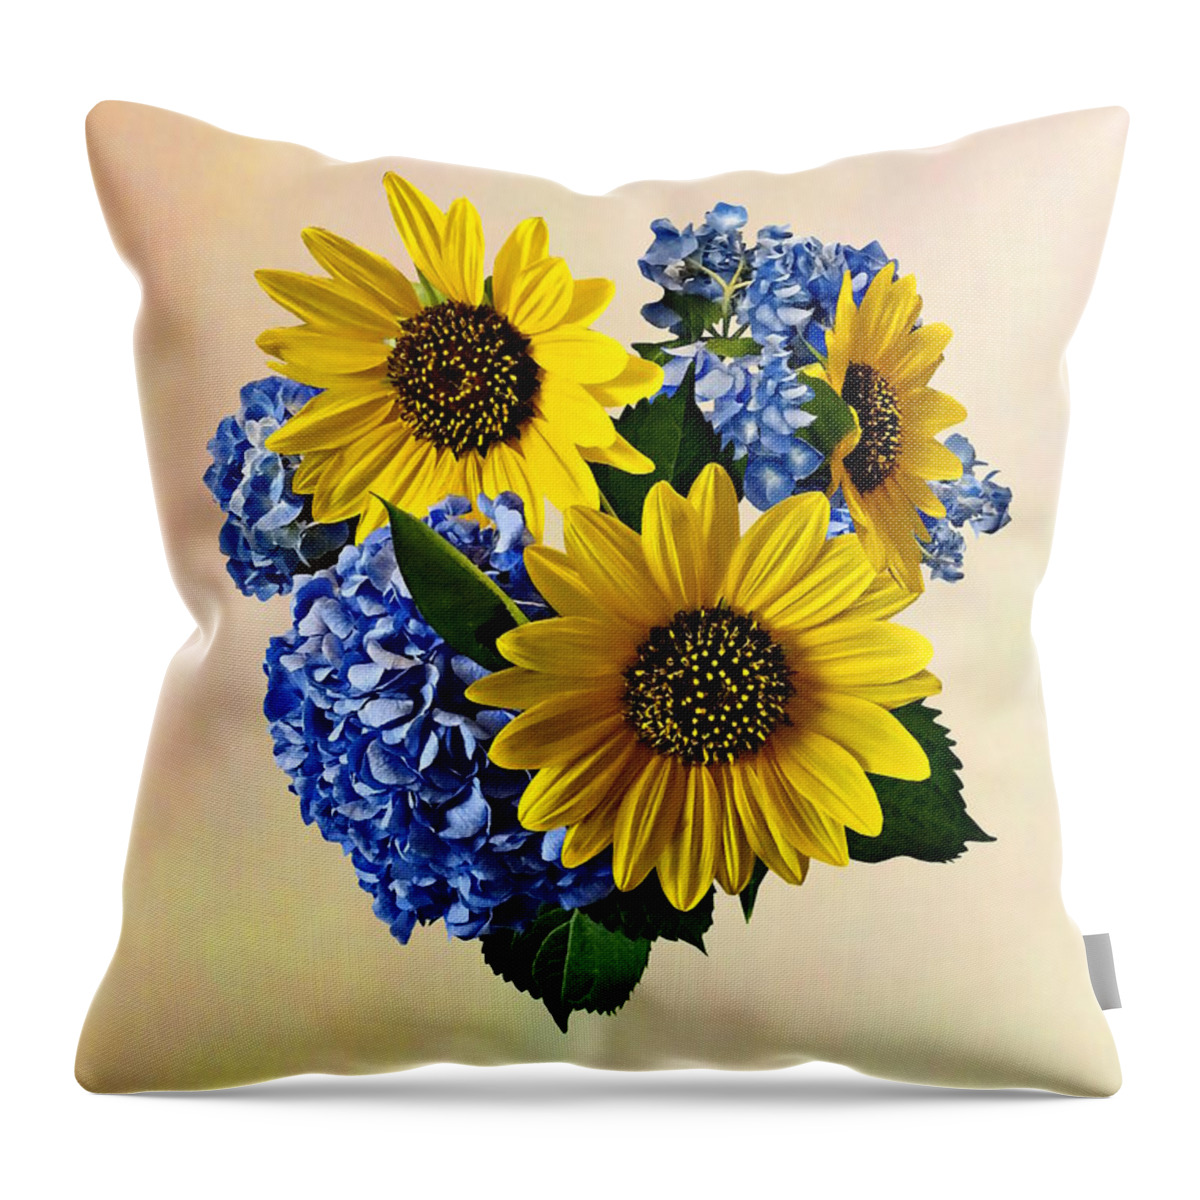 Sunflowers Throw Pillow featuring the photograph Sunflowers and Hydrangeas by Susan Savad